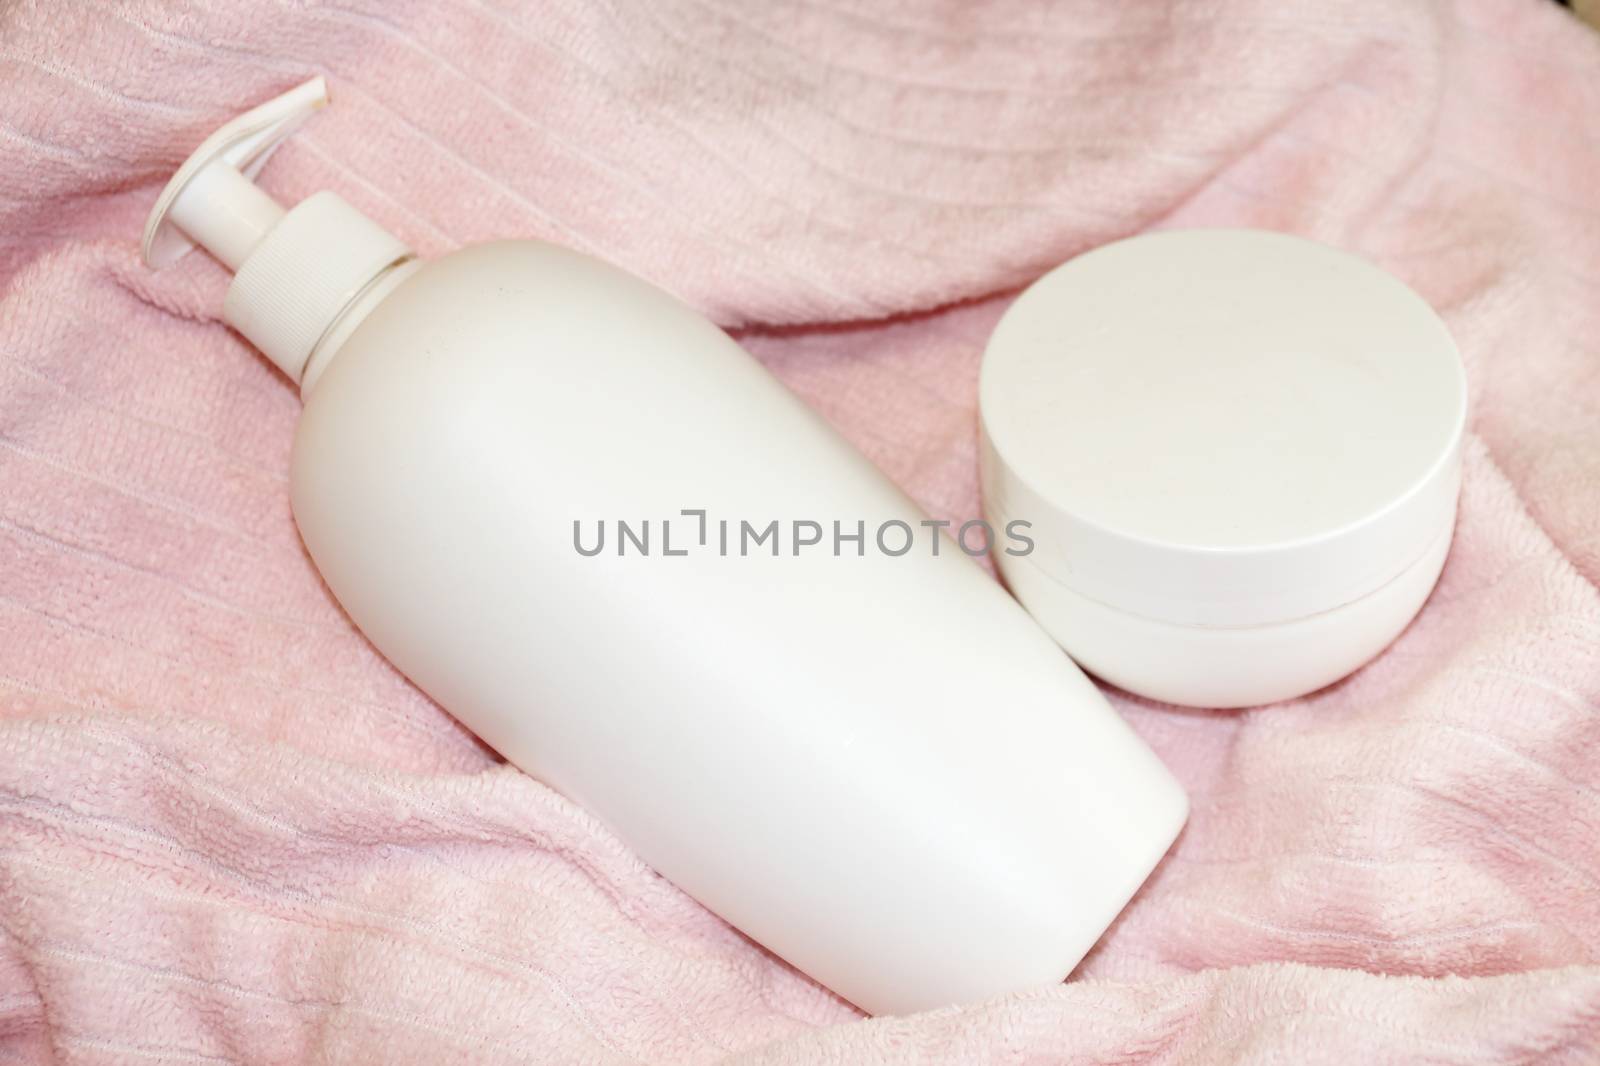 white cosmetic bottle and cream jar on pink terry cloth close-up by Annado